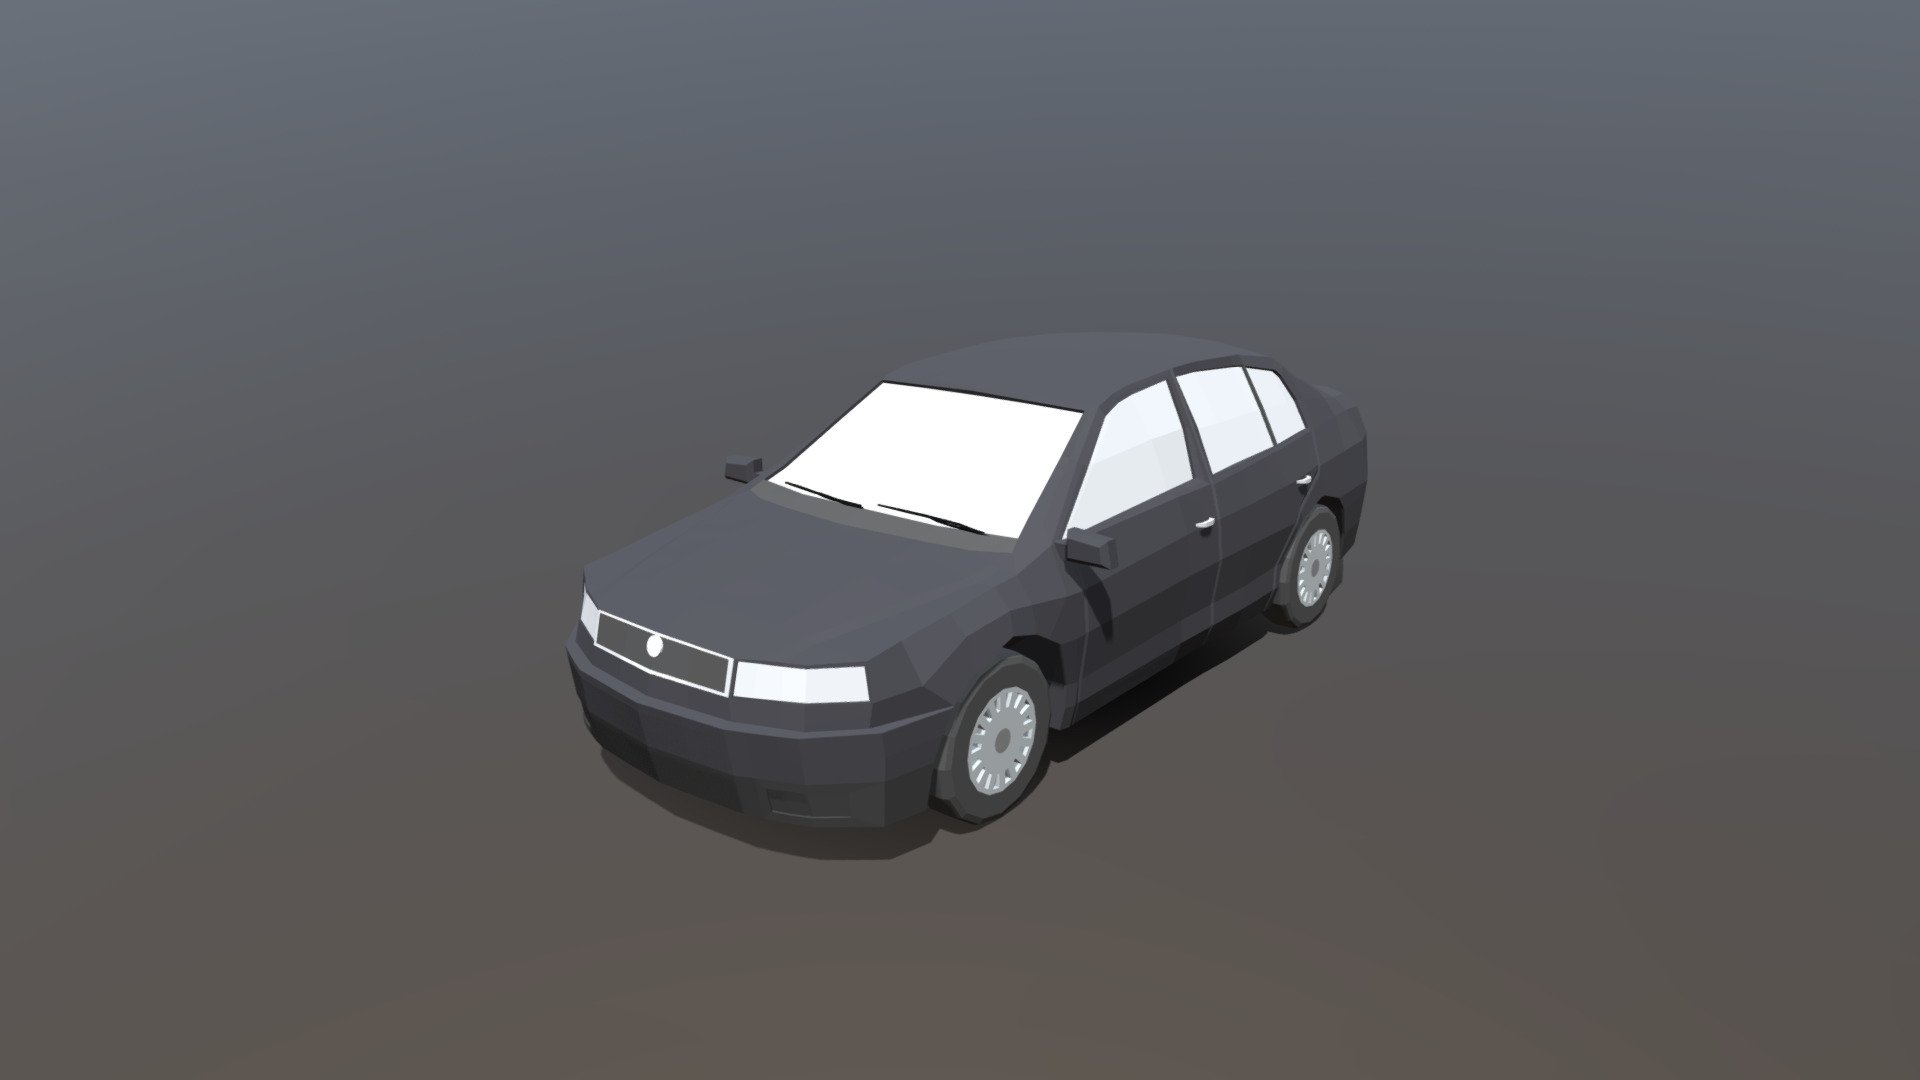 This is a low poly 3d model of a family car. The low poly car was modelled and prepared for low-poly style renderings, background, general CG visualization.

The 3d model is presented as a mesh with quads only.

Verts : 2.833 Faces: 2.798

This model have simple materials with diffuse colors.

No ring, maps and no UVW mapping is available.

The original file was created in blender. You will receive a 3DS, OBJ, FBX, blend, DAE, Stl.

All preview images were rendered with Blender Cycles. Product is ready to render out-of-the-box. Please note that the lights, cameras, and background is only included in the .blend file. The model is clean and alone in the other provided files, centred at origin and has real-world scale 3d model